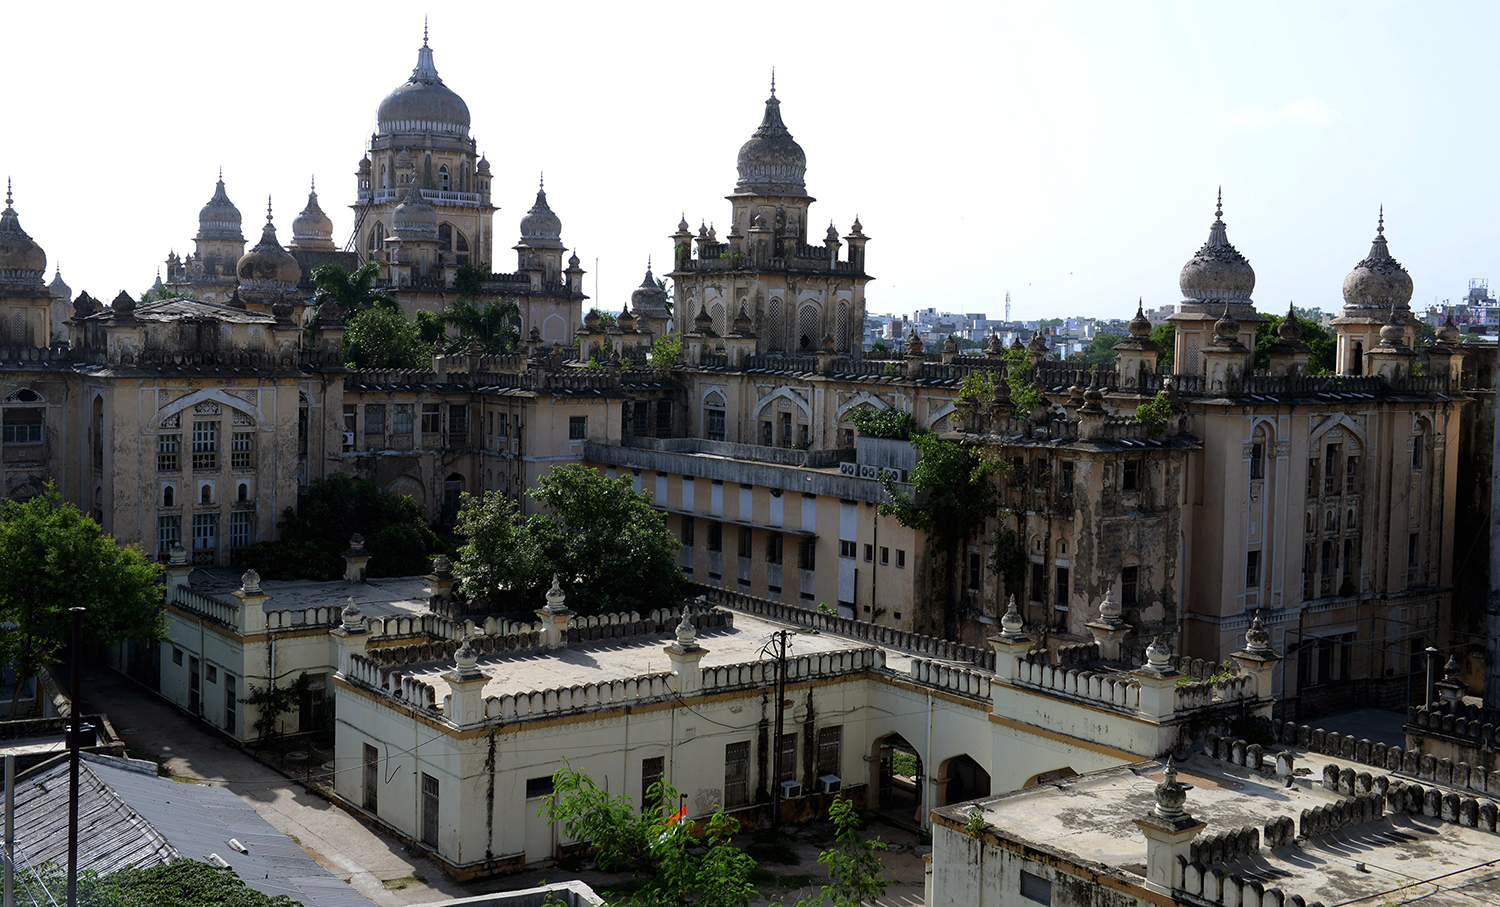 KCR’s planned demolition of Osmania Hospital undermines COVID efforts, city’s heritage